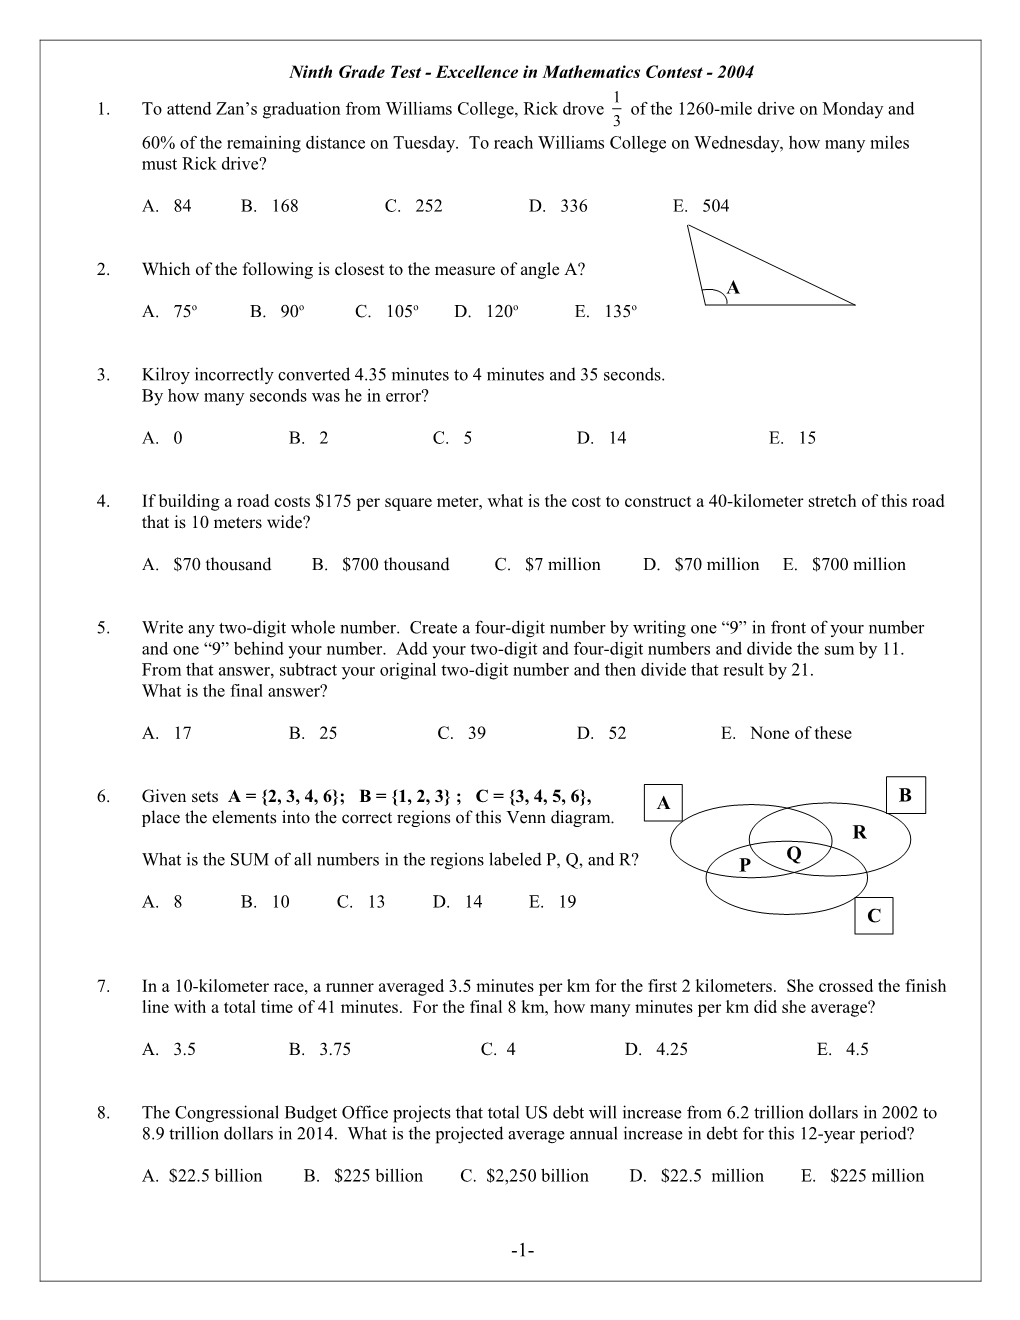 Ninth Grade Test - Excellence in Mathematics Contest - 2004